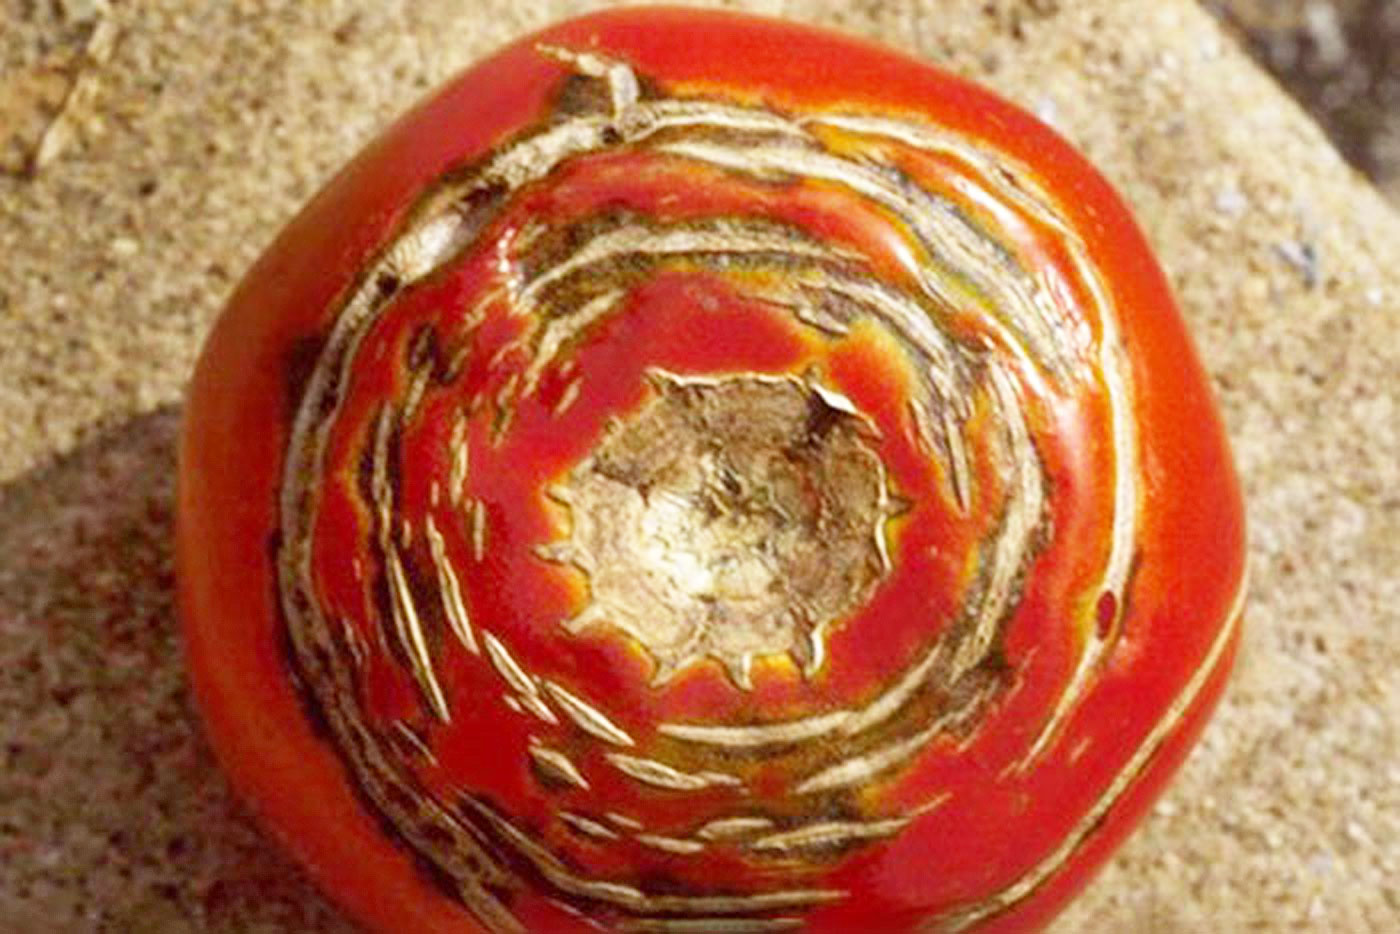 top view of tomato with spiral cracking wounds